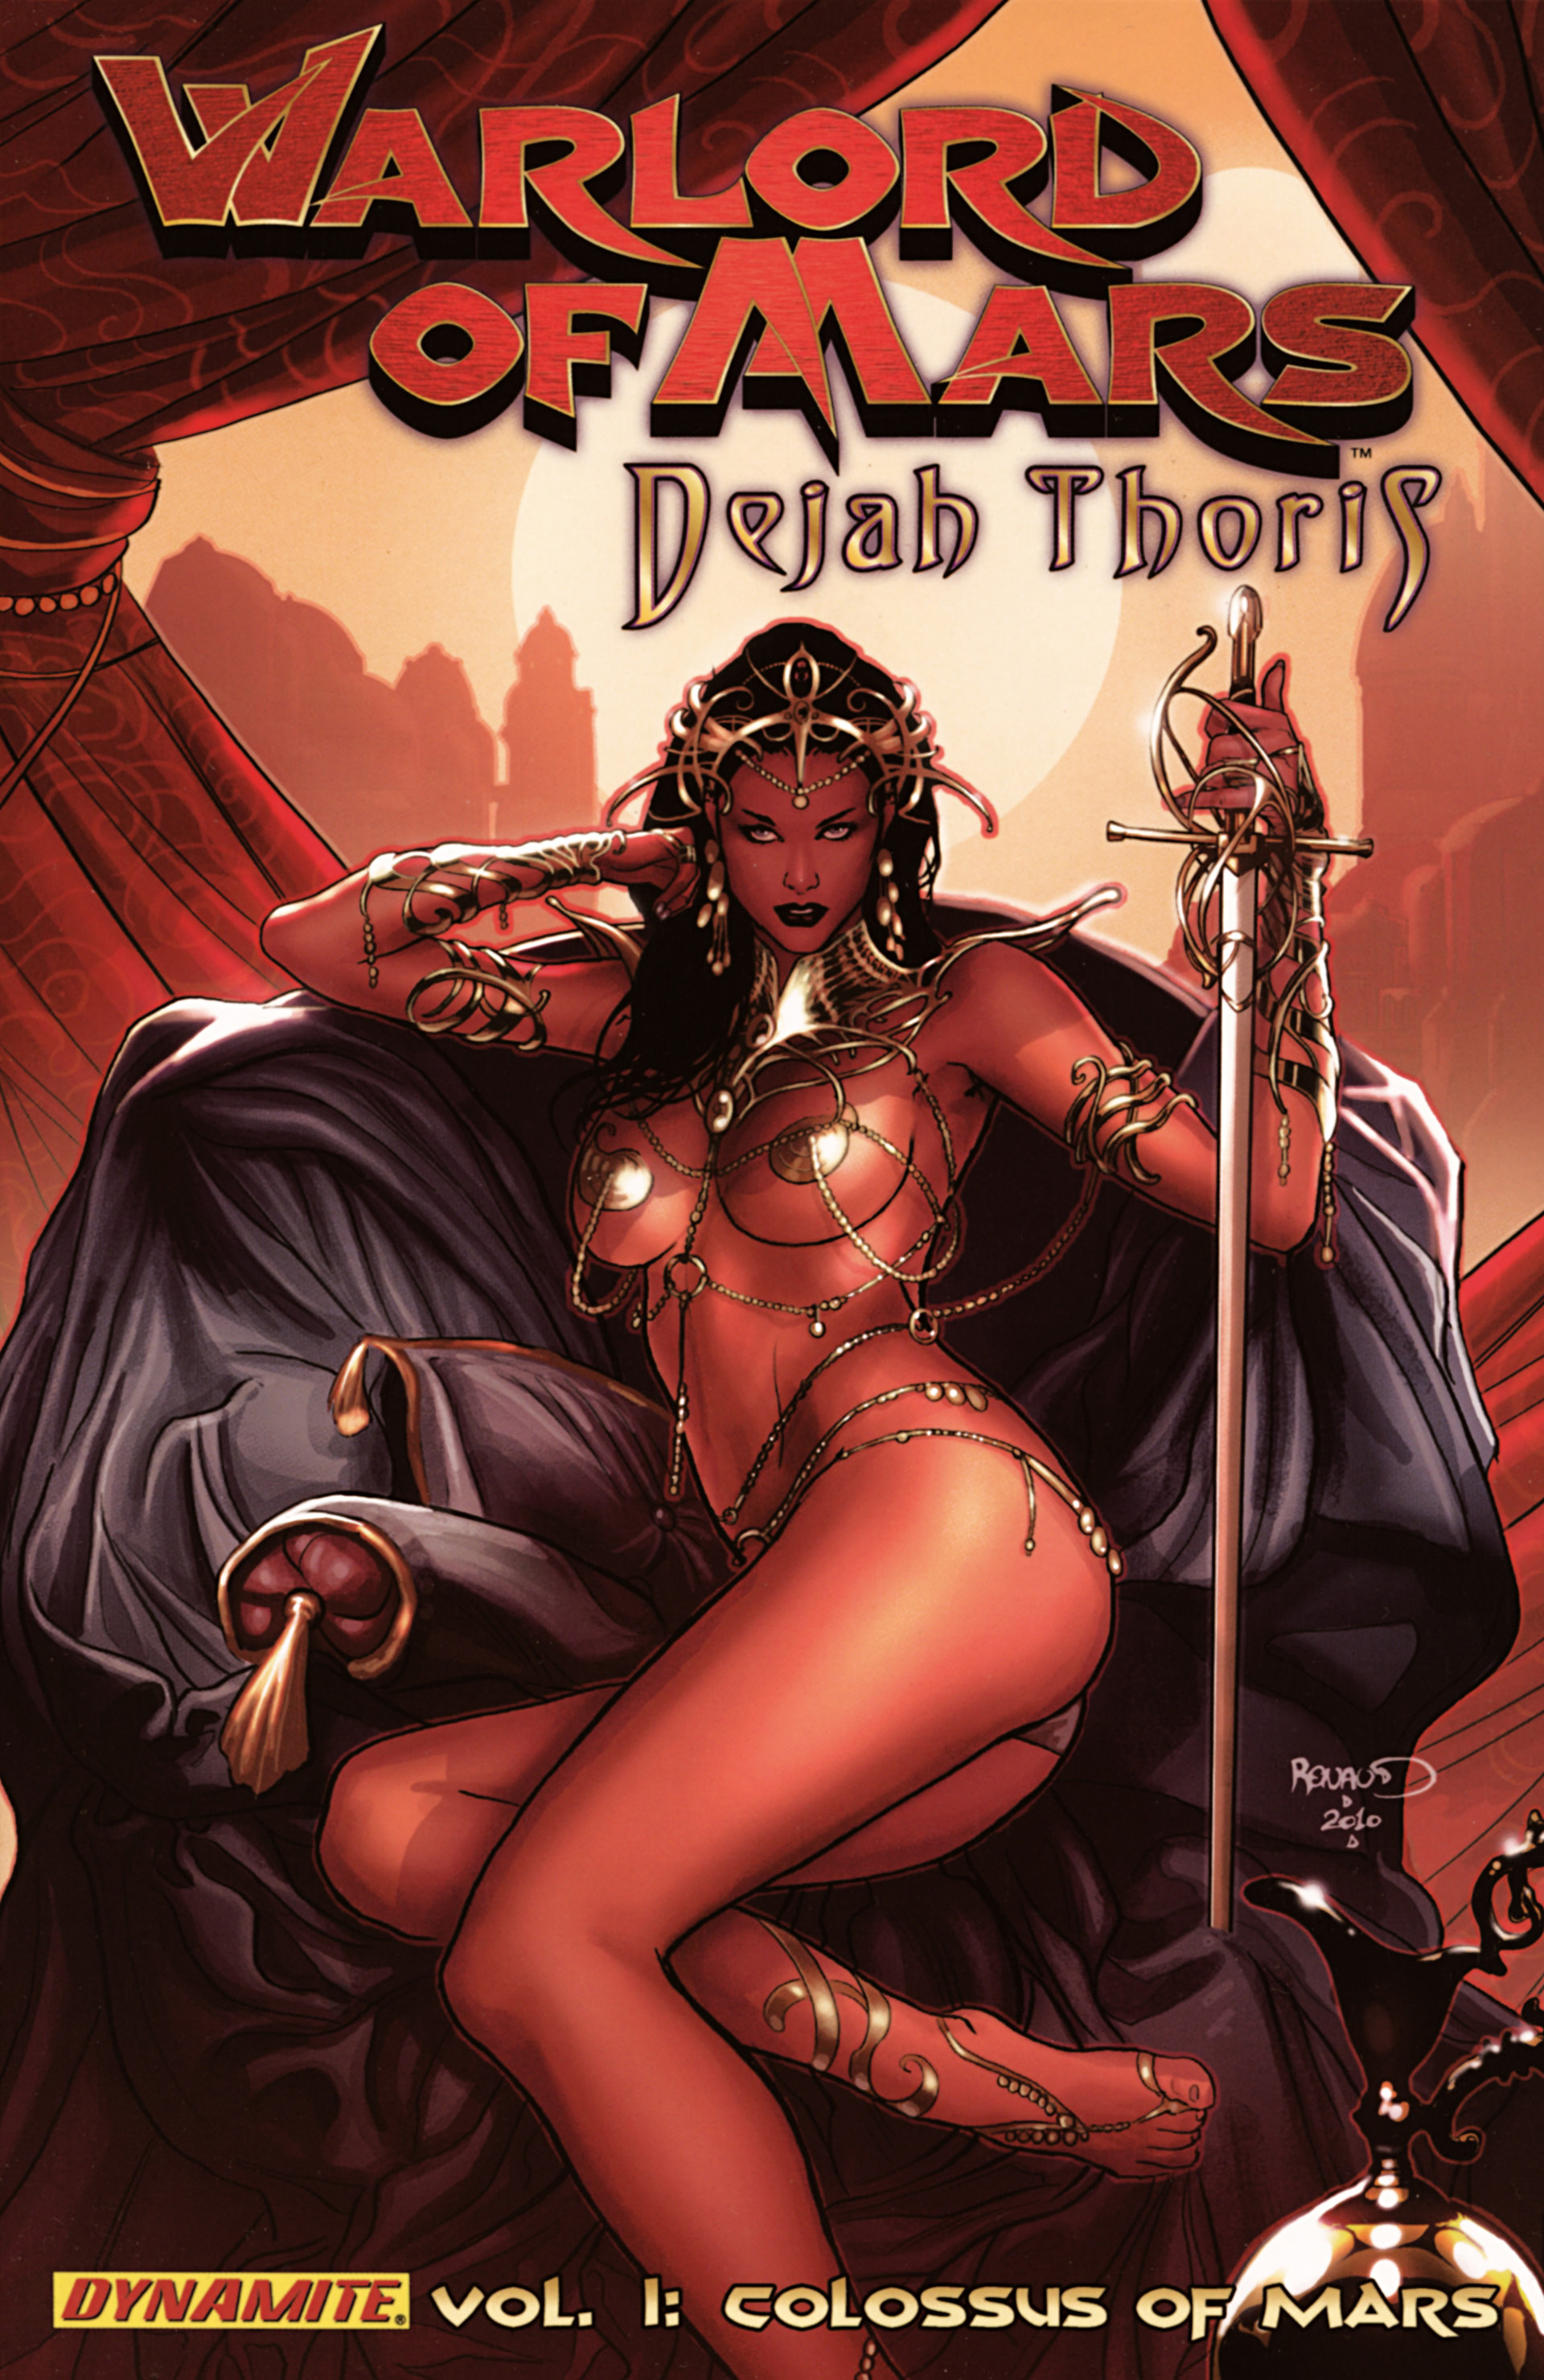 Warlord of Mars Dejah Thoris Vol 1 The Colossus of Mars by Renaut Porn Comic